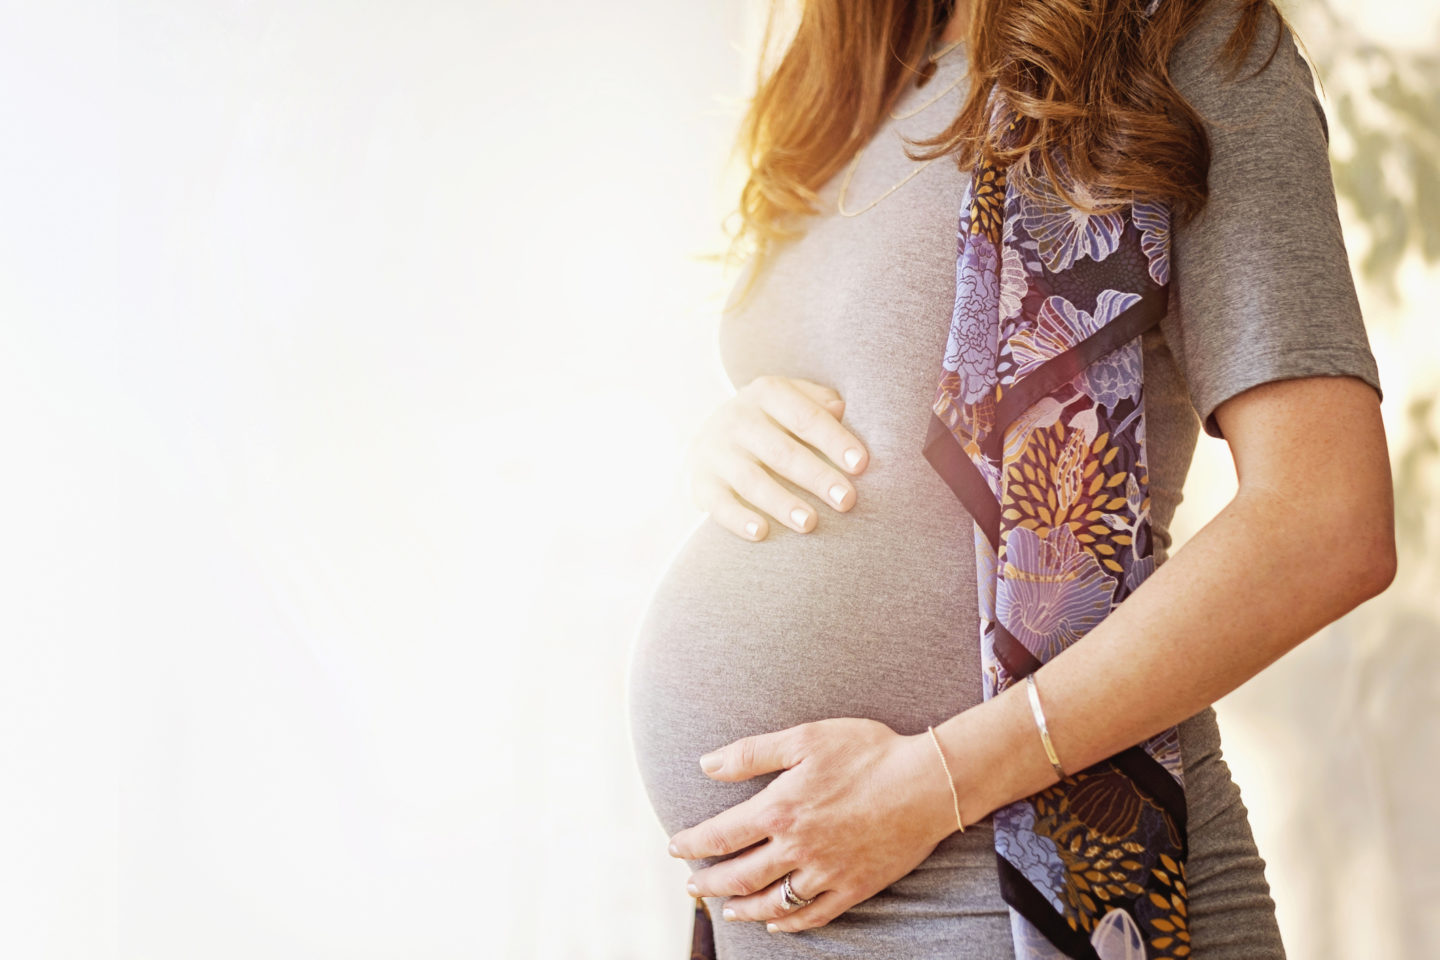 Should Psychotherapy Be Included in Prenatal Care?